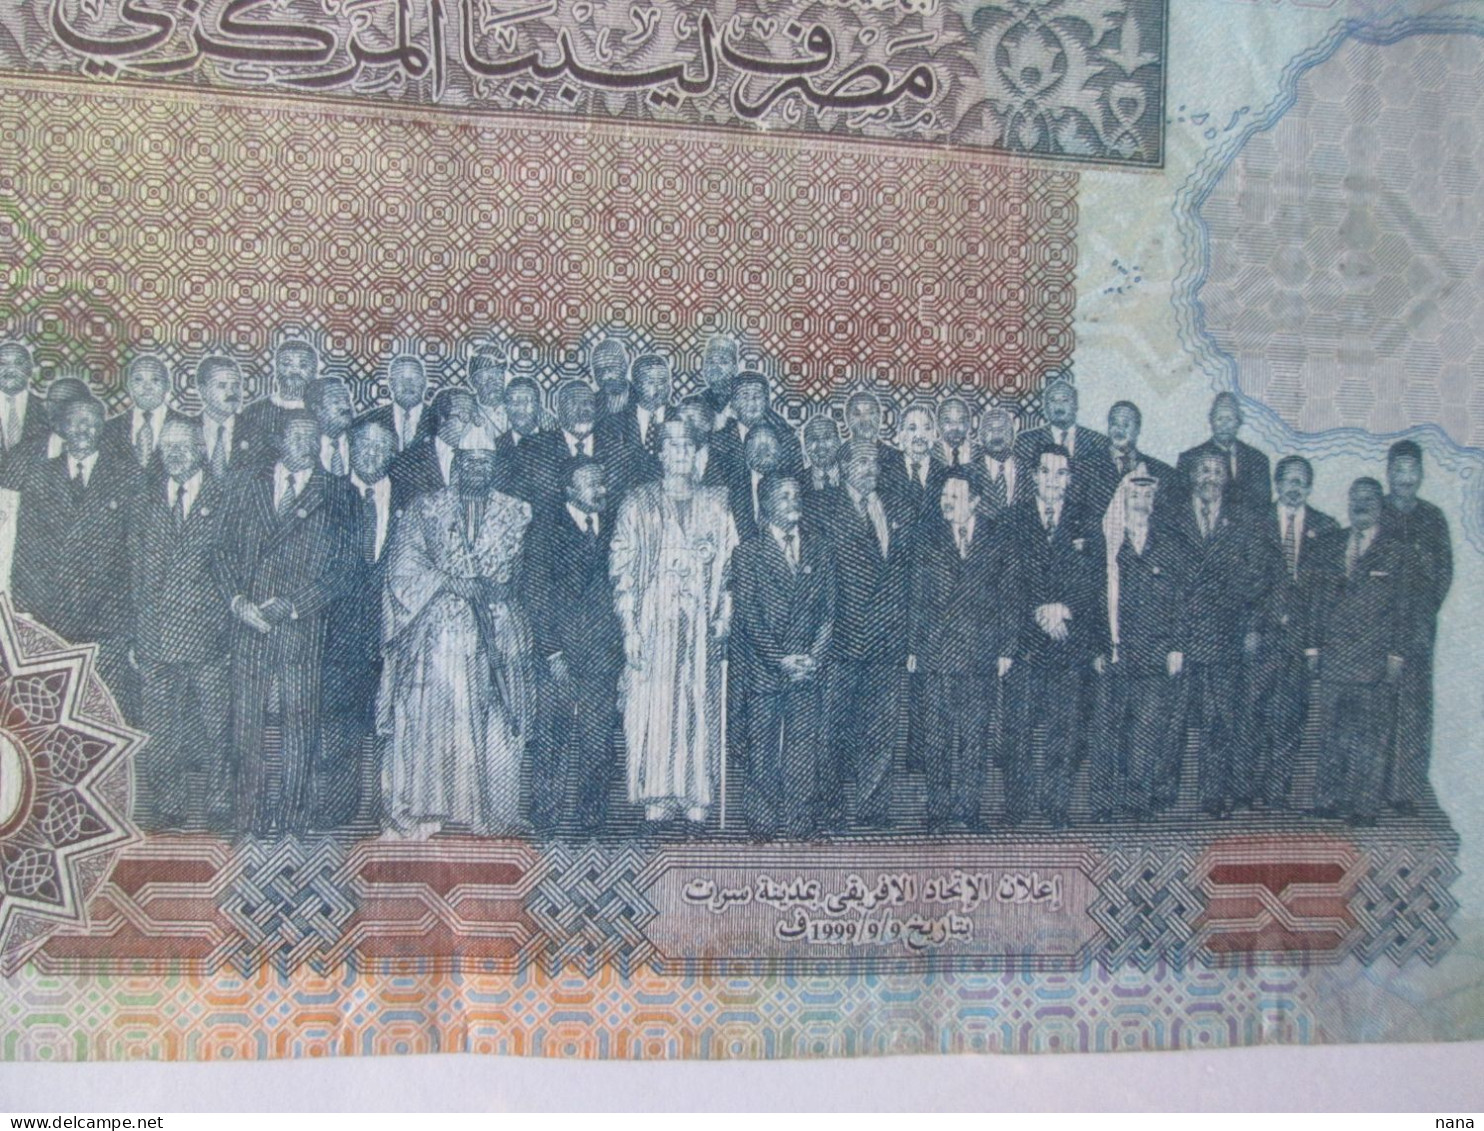 Libya 20 Dinars 2002 Banknote The Greatest African Dictators Of The 20th Century.Les Plus Grands Dictateurs Africains - Libyen